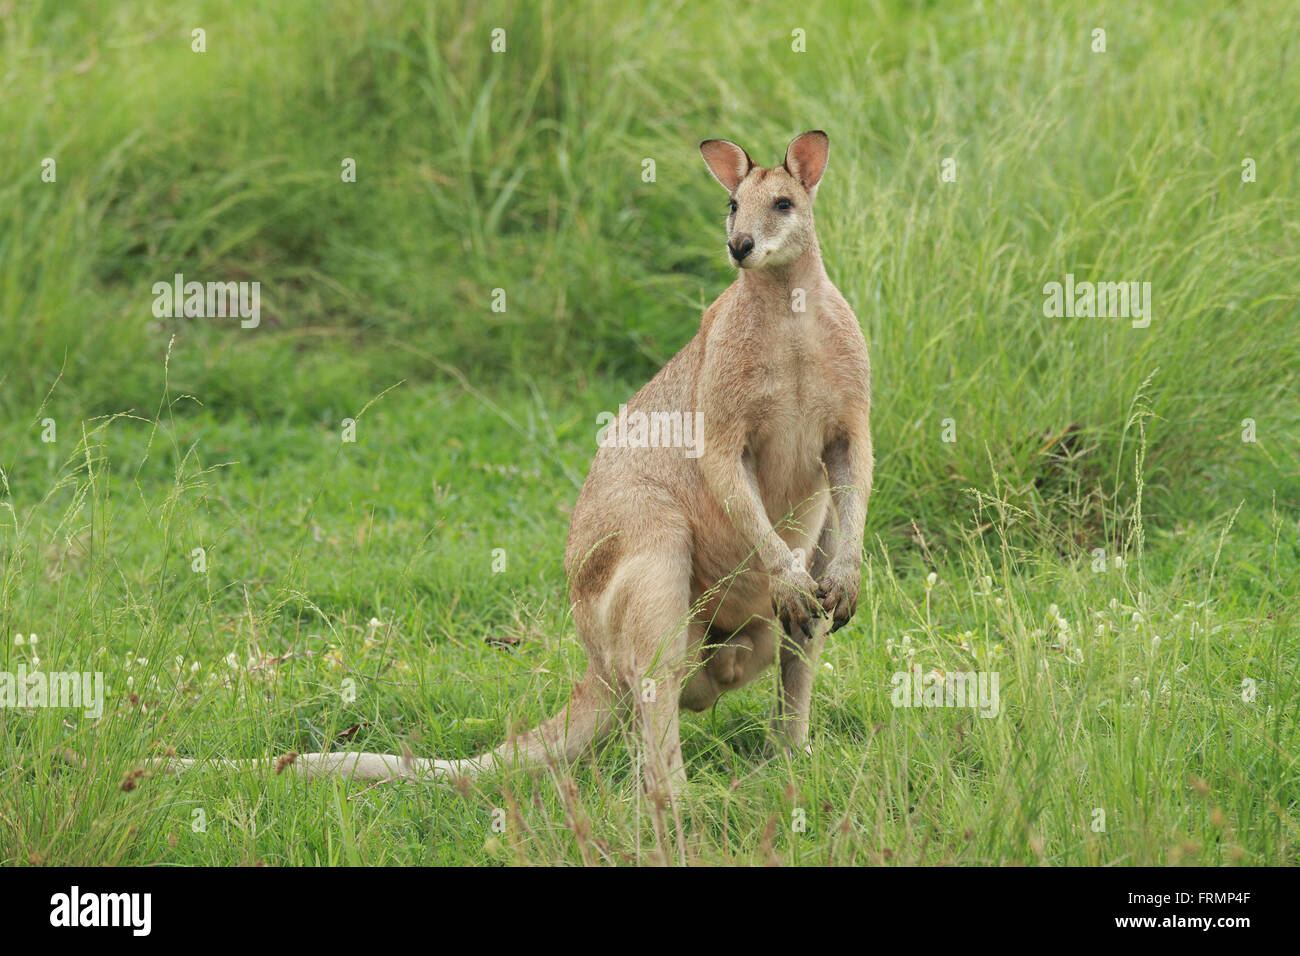 A male Agile Wallaby - Macropus agilis - also known as a river wallaby or sand wallaby standing in green grass land in Australia Stock Photo